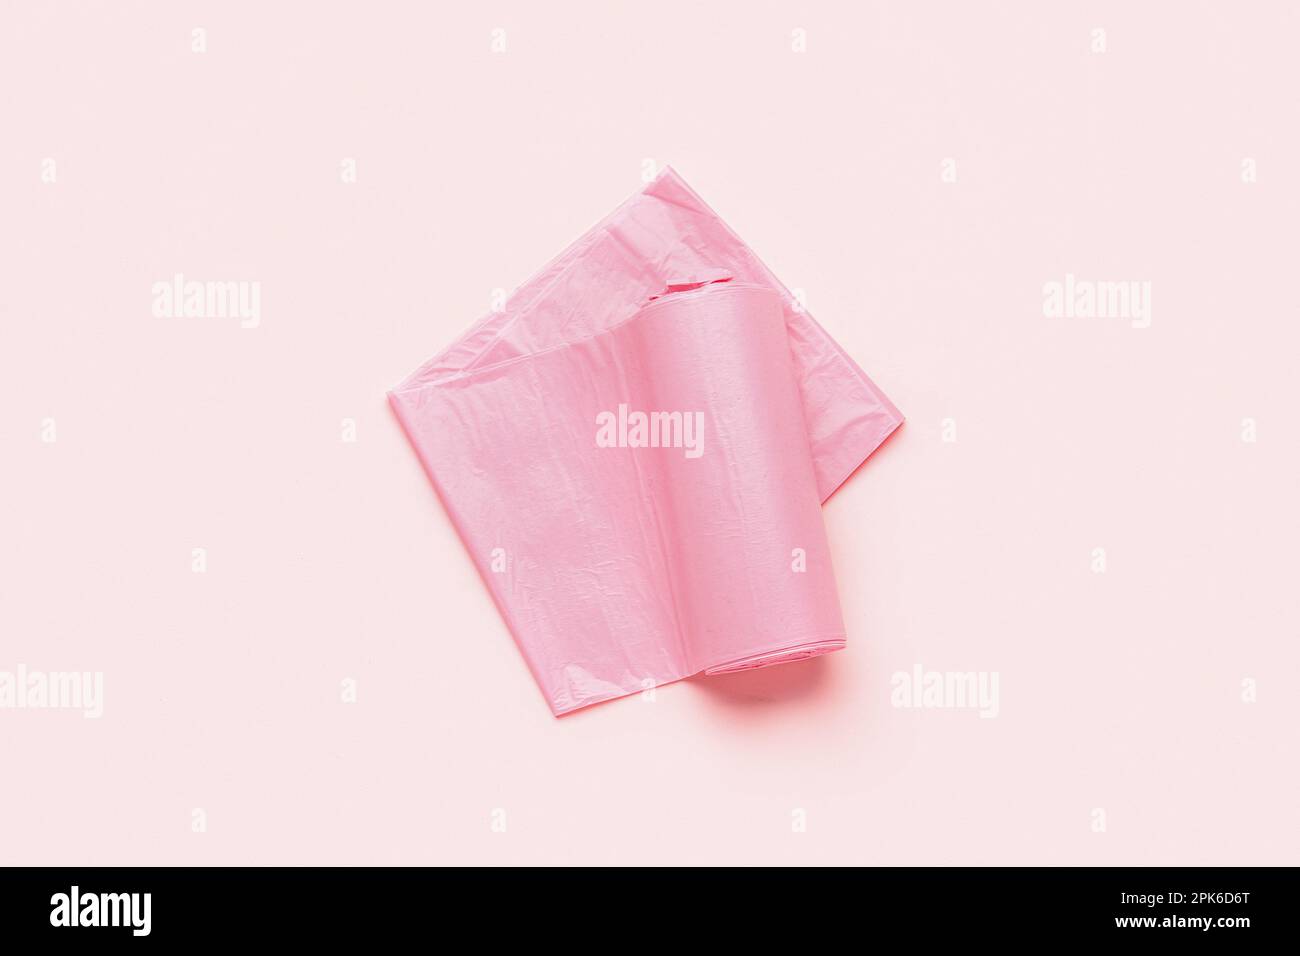 https://c8.alamy.com/comp/2PK6D6T/roll-of-garbage-bags-on-pink-background-2PK6D6T.jpg